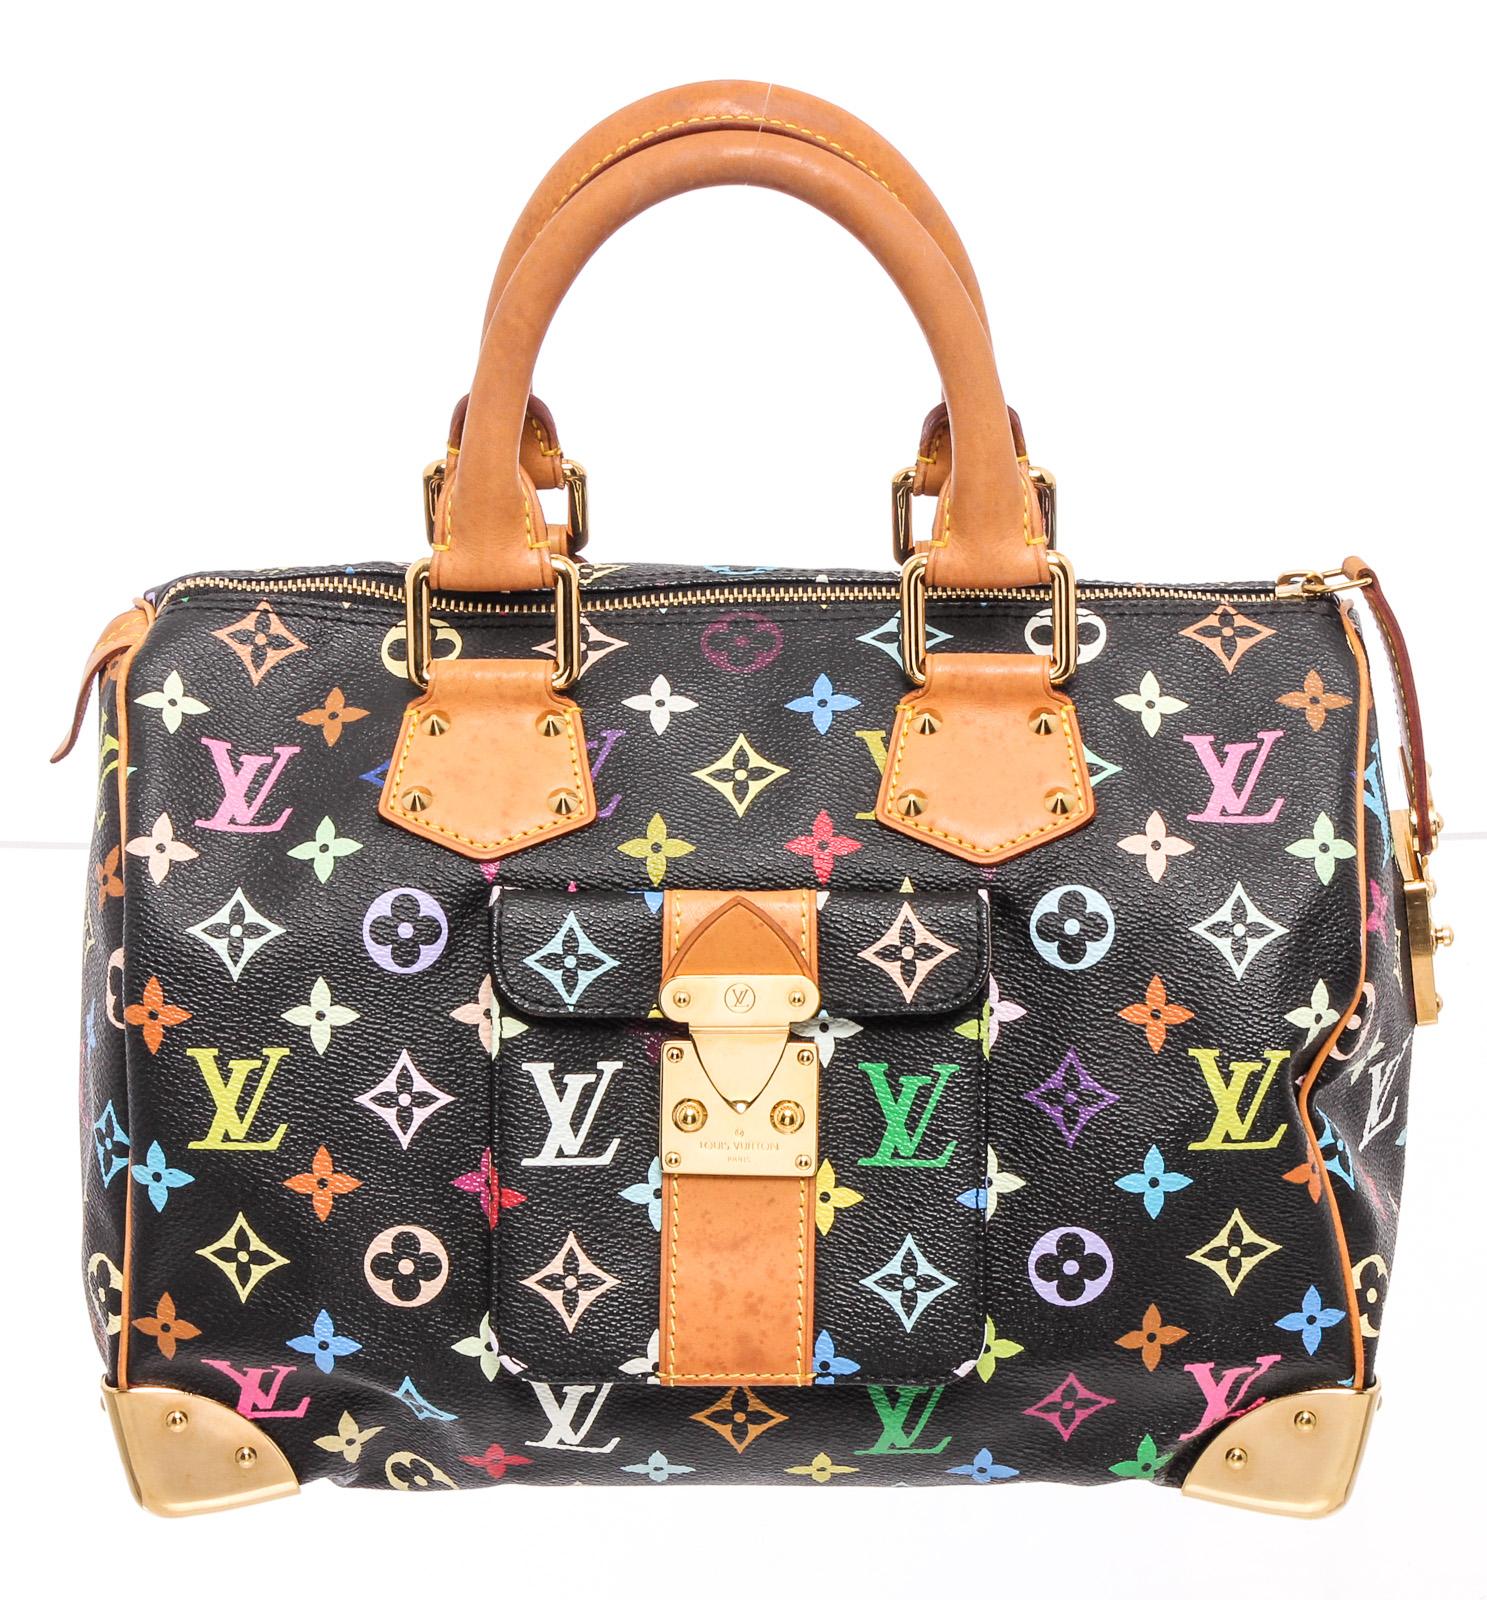 From the Takashi Murakami Collection. Black Multicolore monogram coated canvas Louis Vuitton Speedy 30 with brass hardware, tan vachetta leather trim, dual rolled top handles, single exterior pocket with flap and S-lock closure, tan Alcantara